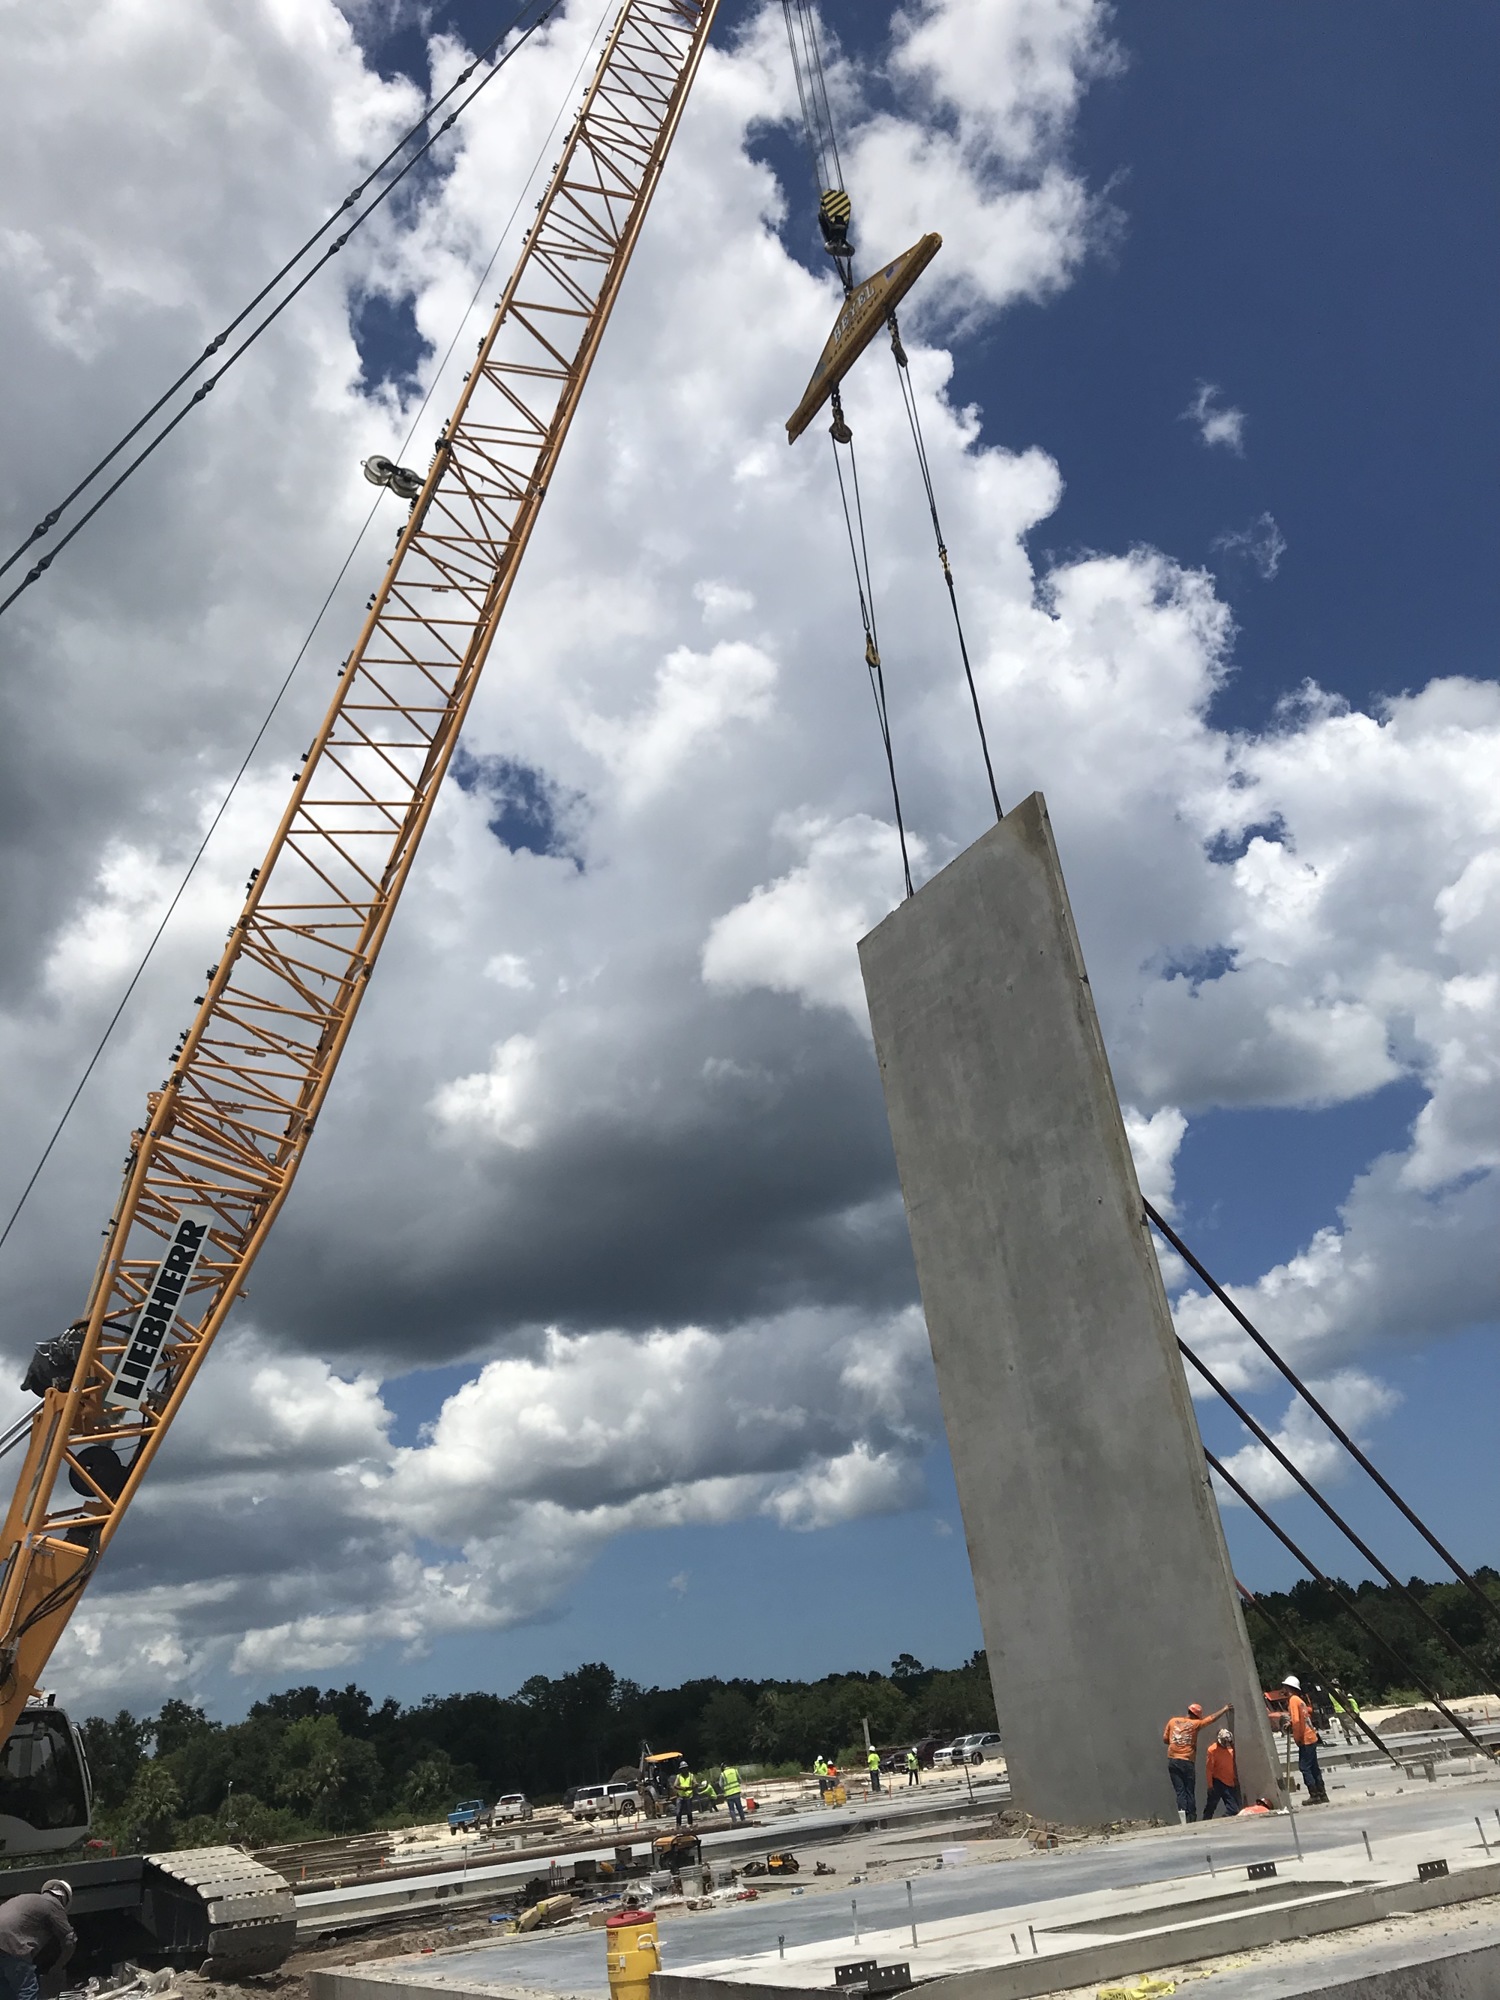 Workers erect a 65-foot wall for the new Security First Insurance headquarters, signaling the start of a new era for the company and the city. Courtesy photo